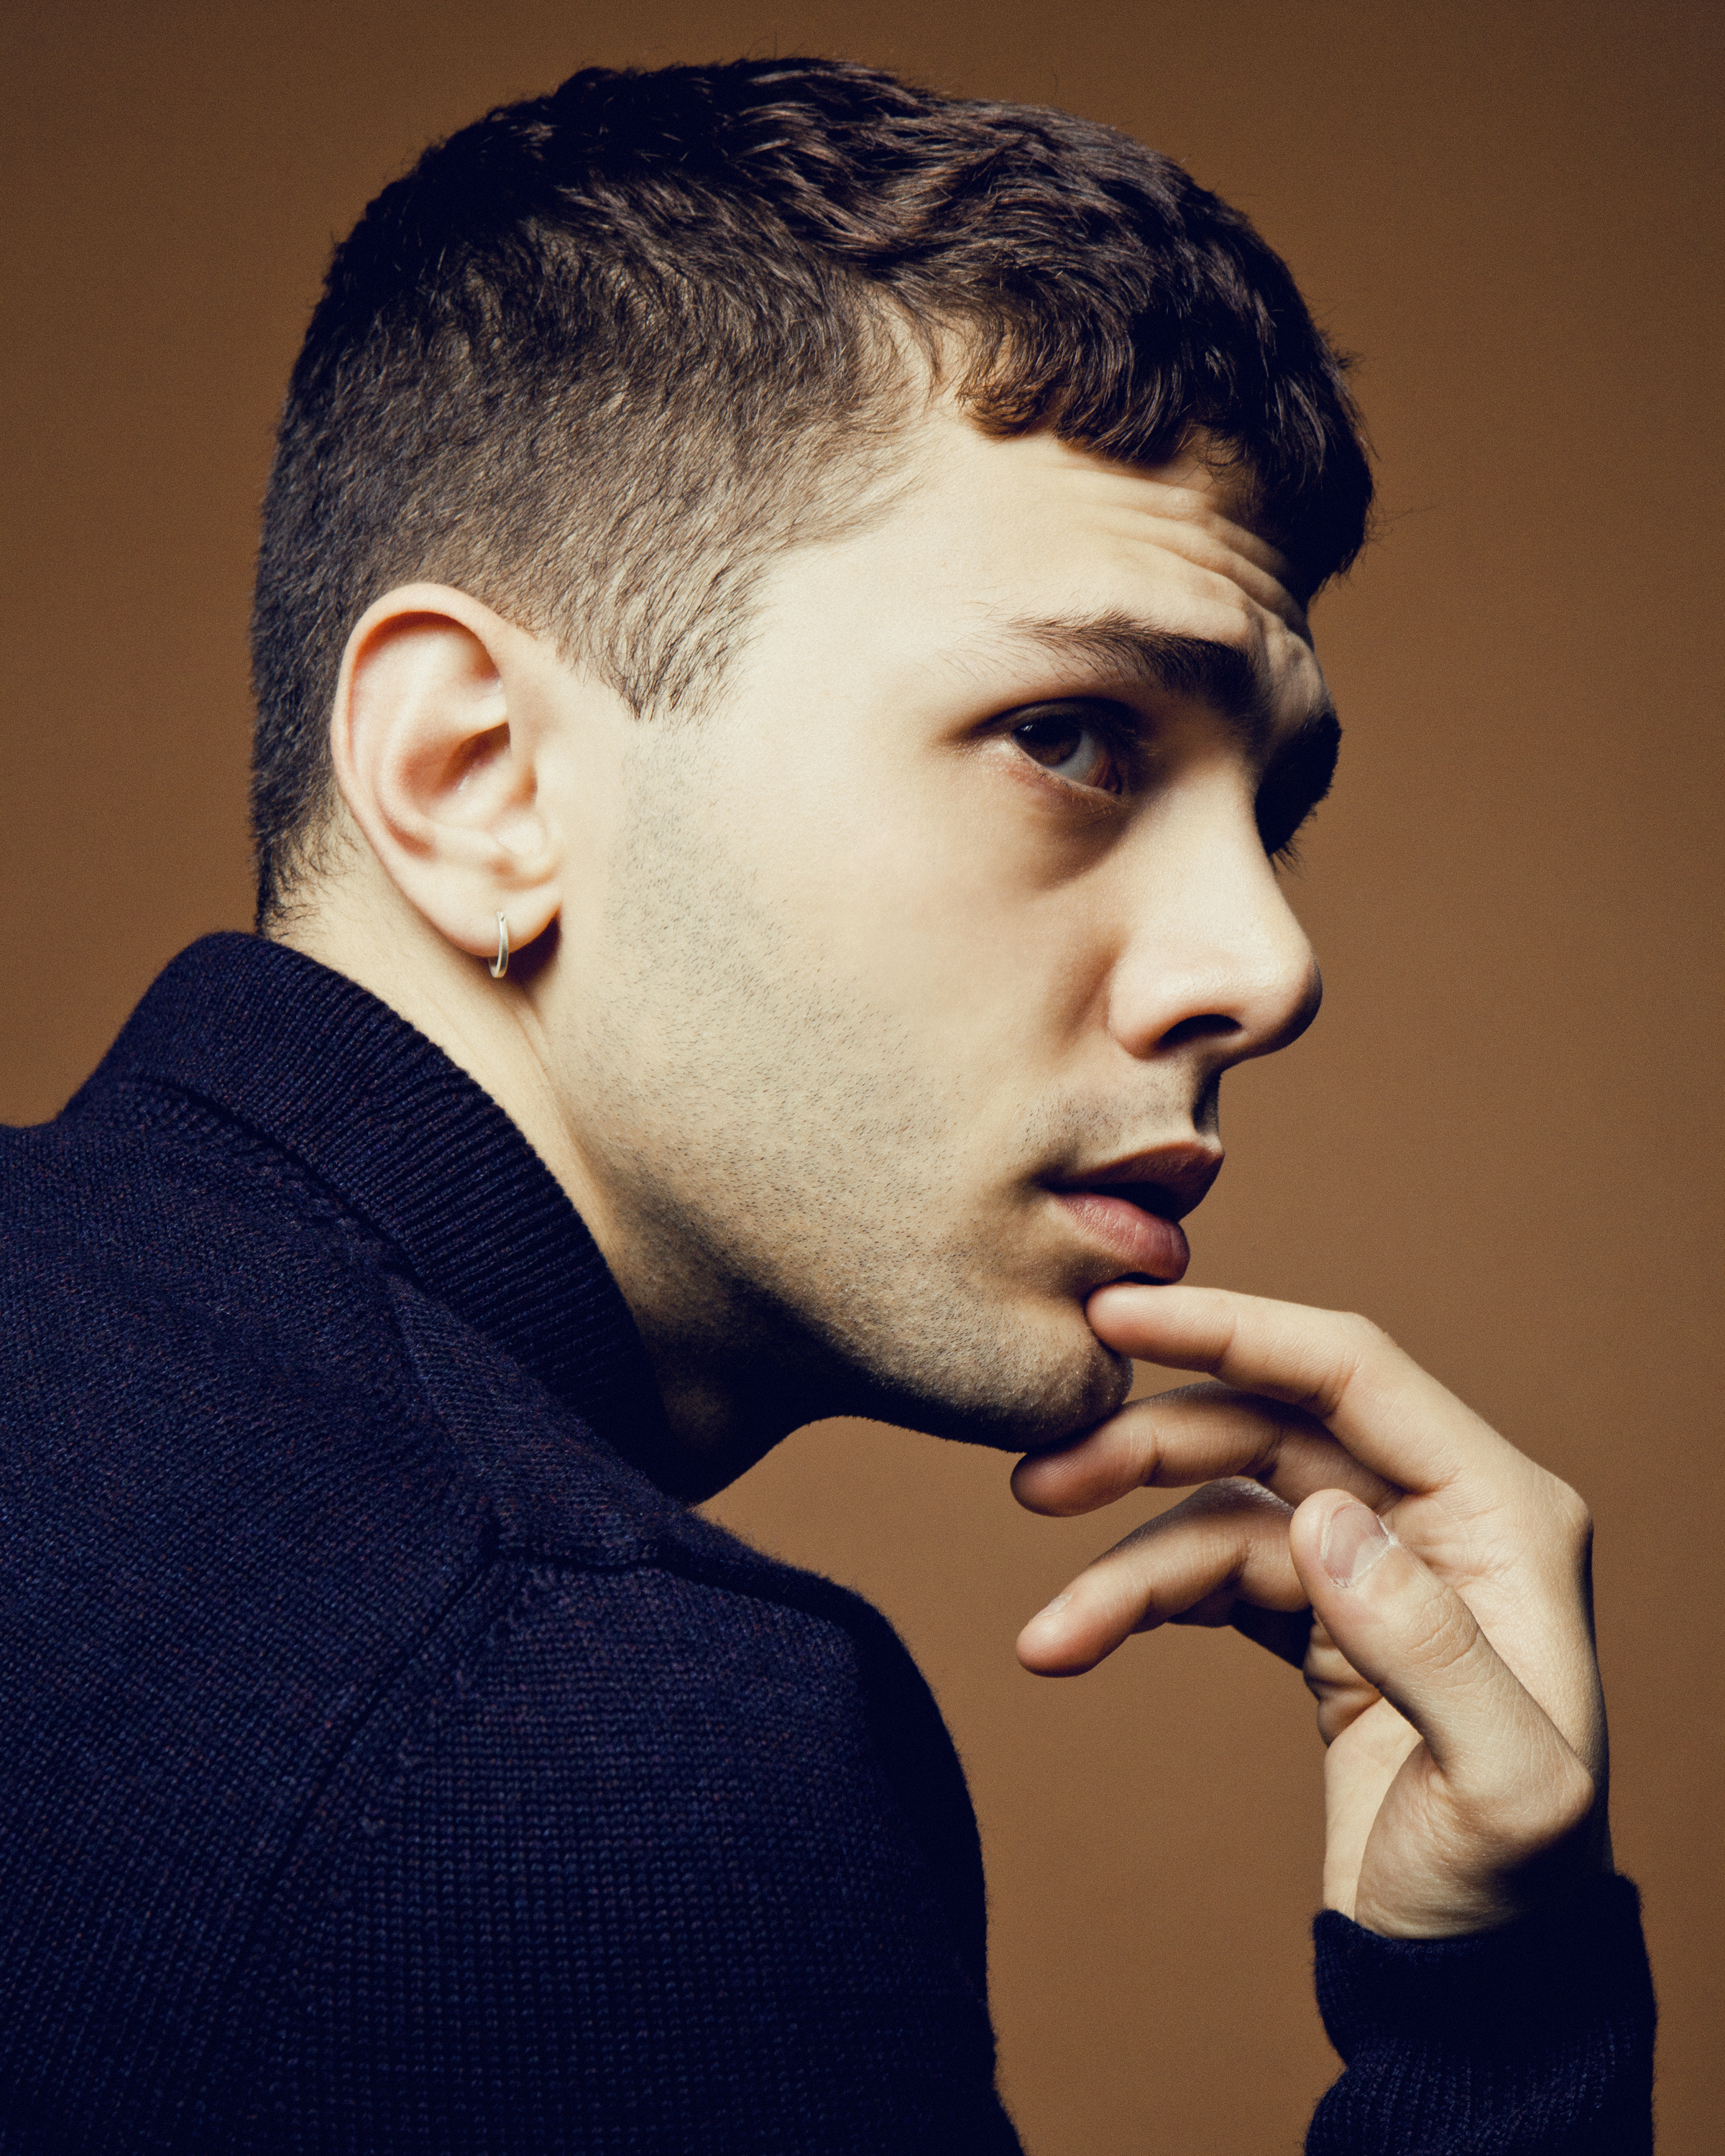 Xavier Dolan confirms he wants to stop making films